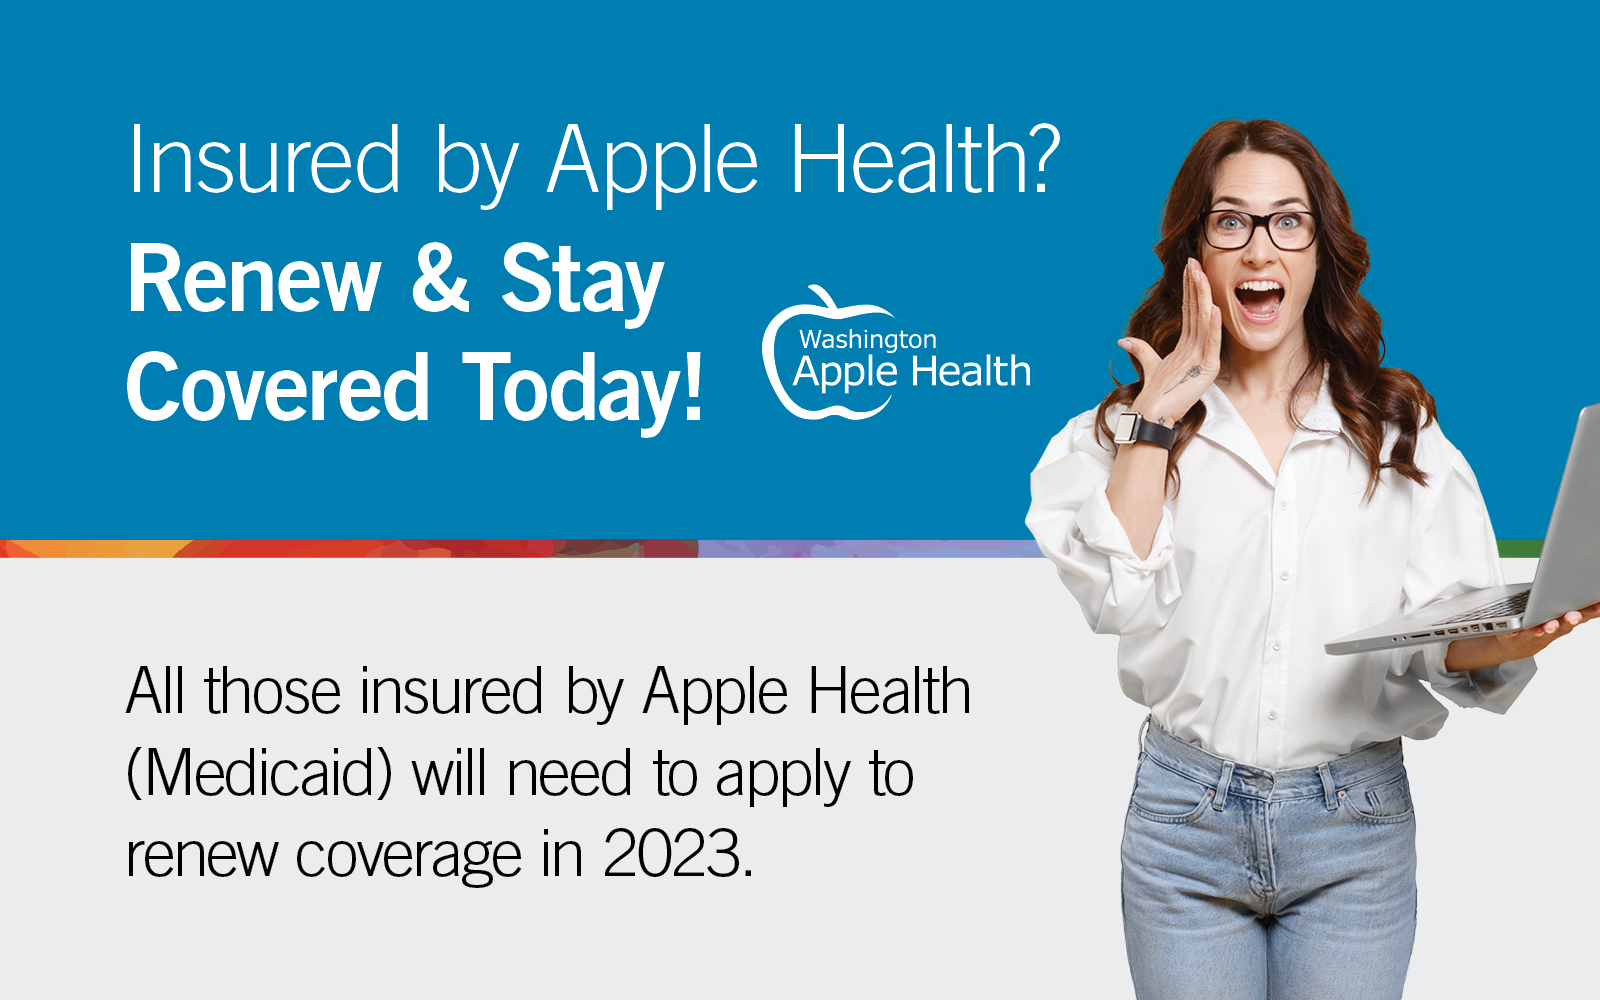 Starting Now, All Medicaid/Apple Health Members Should Complete Three Steps